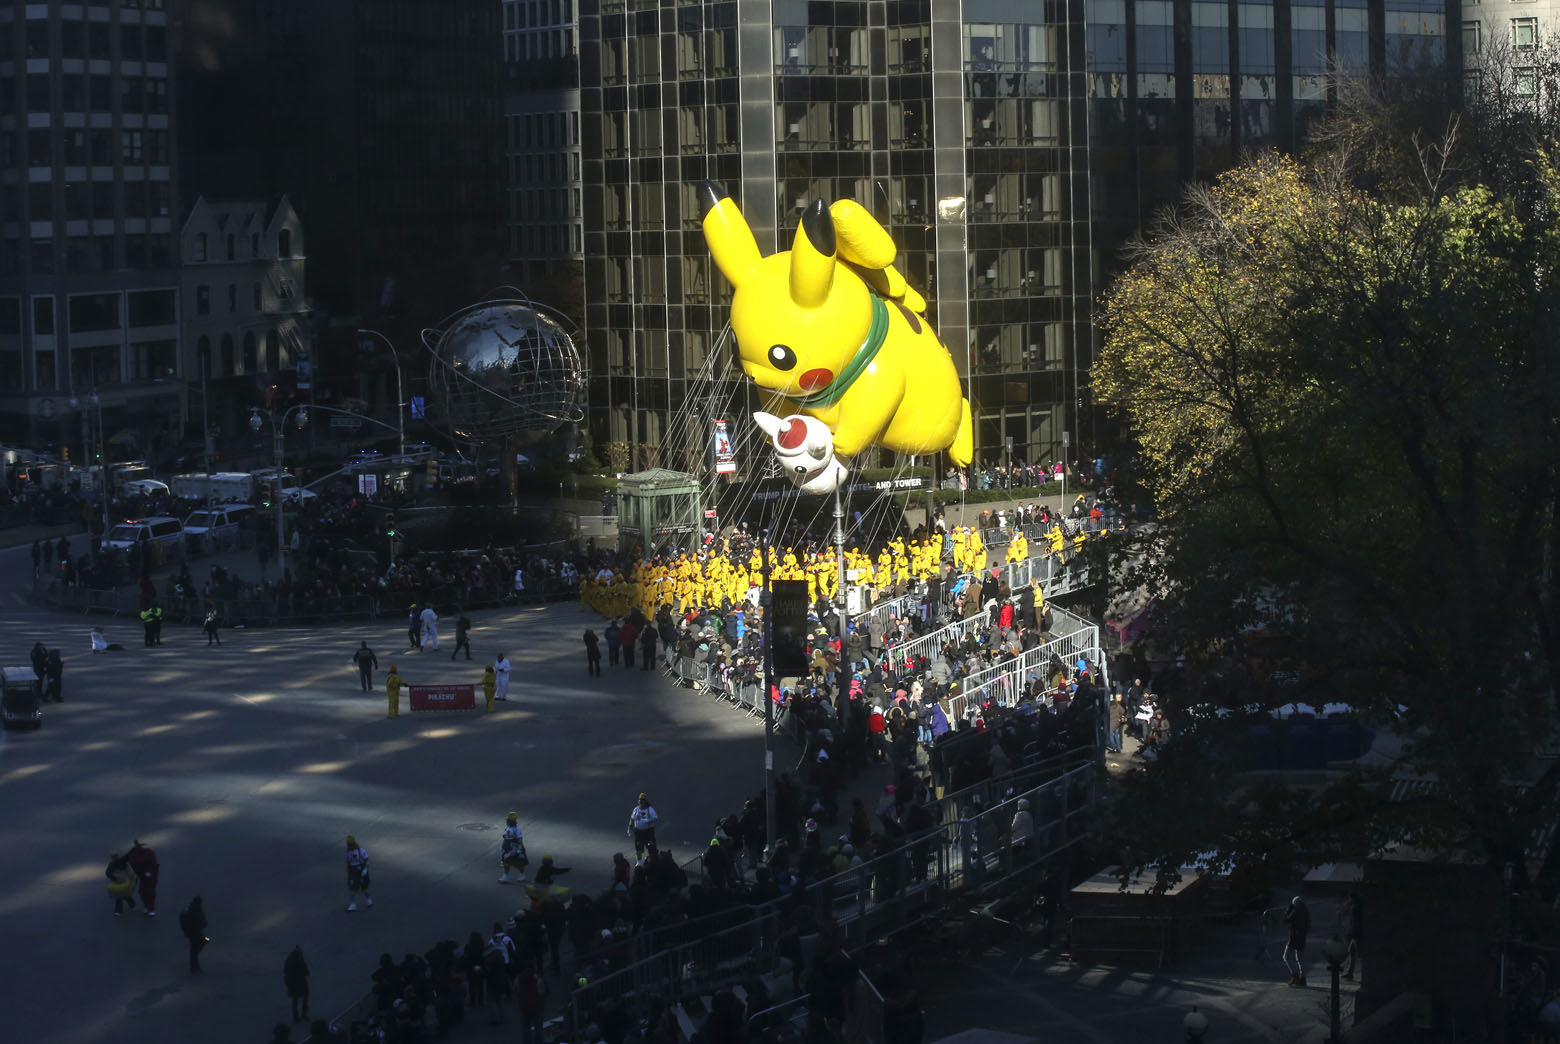 NEW YORK, NY - NOVEMBER 22: The Pikachu balloon floats during the 92nd annual Macy's Thanksgiving Day Parade on November 22, 2018 in New York City. (Photo by Kena Betancur/Getty Images)